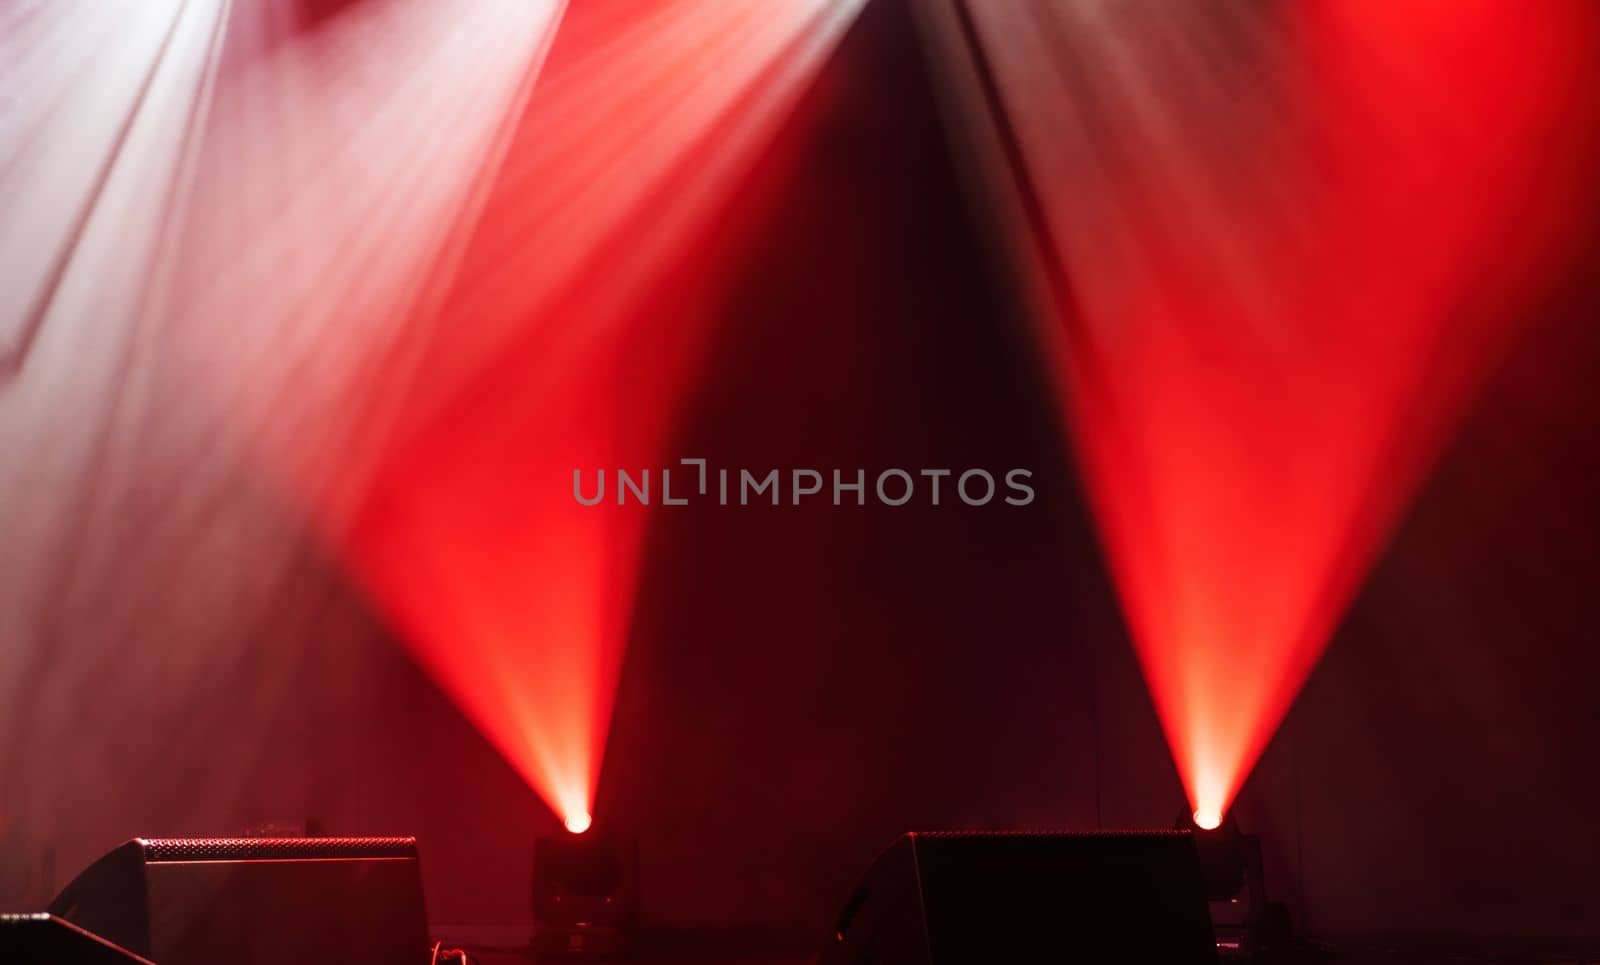 Light on a free stage, scene with red spotlights on a background